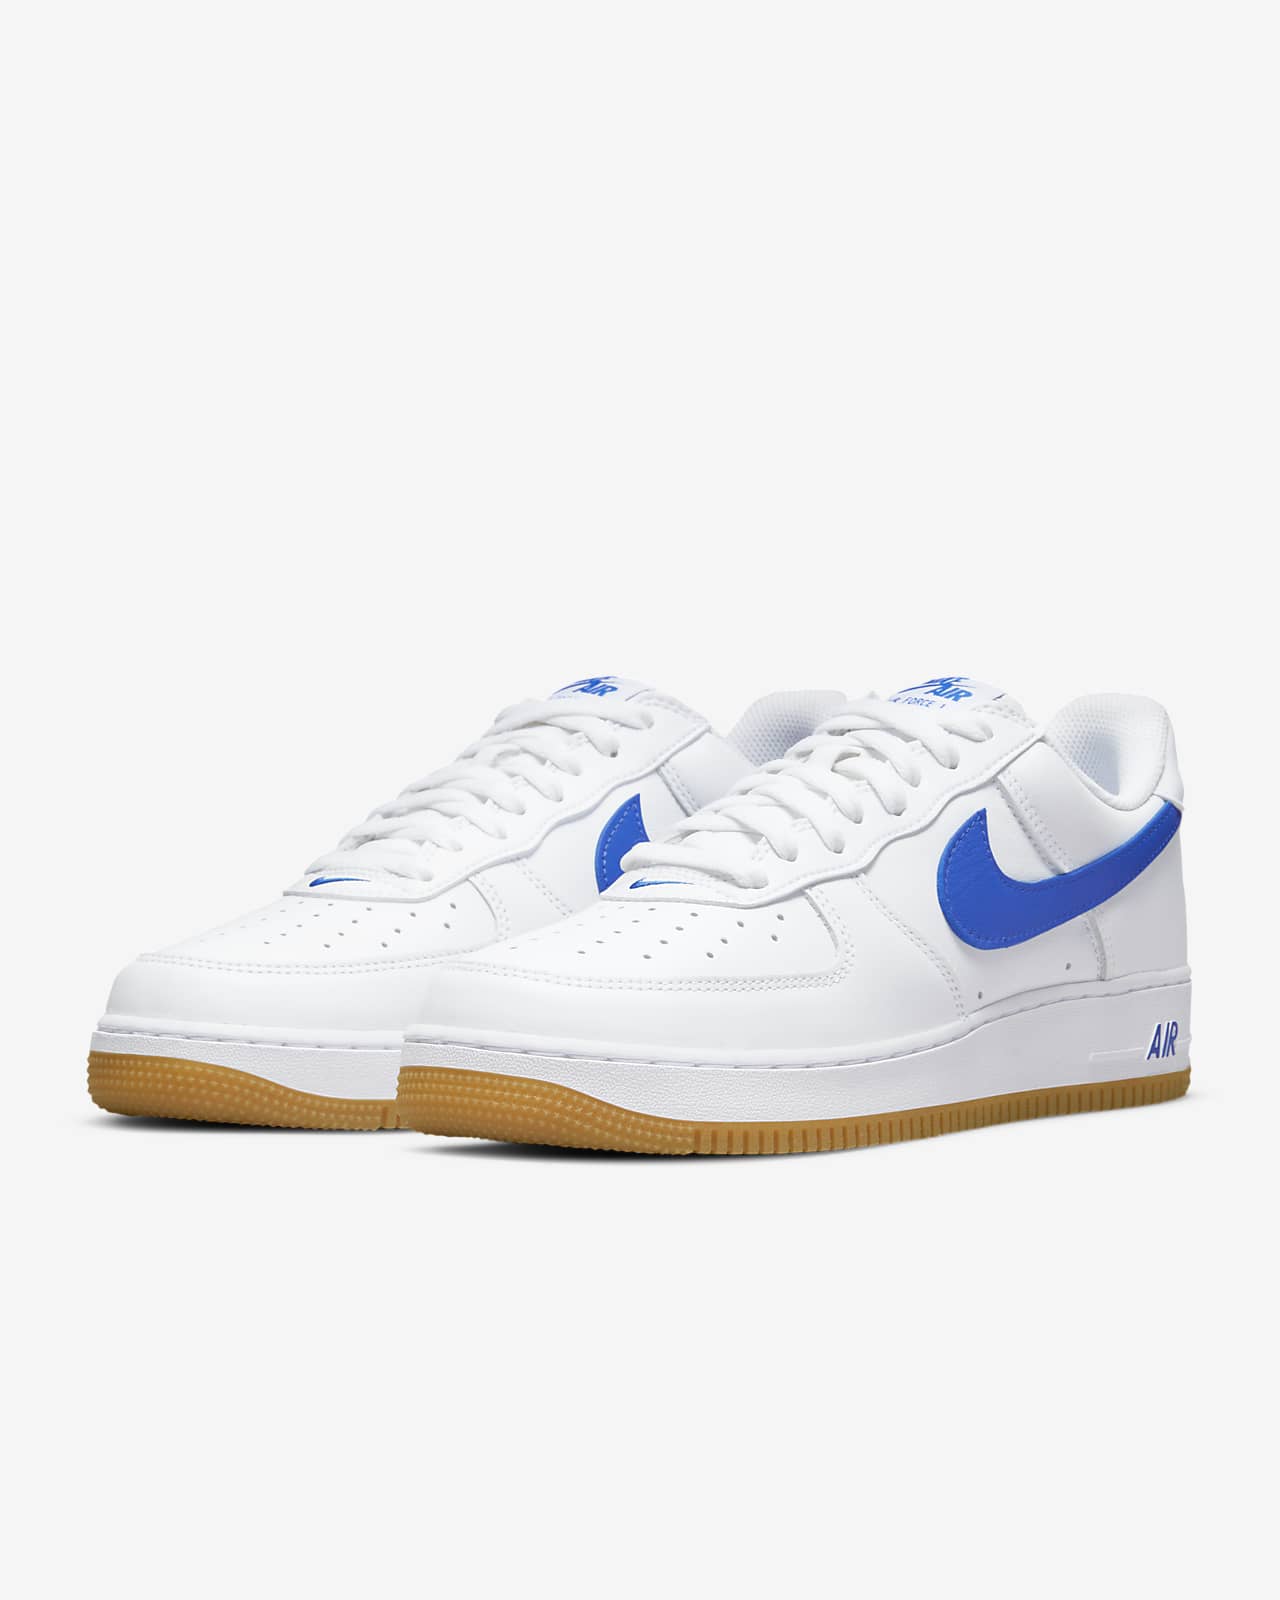 Air Force 1 Low Retro Hombre. Nike